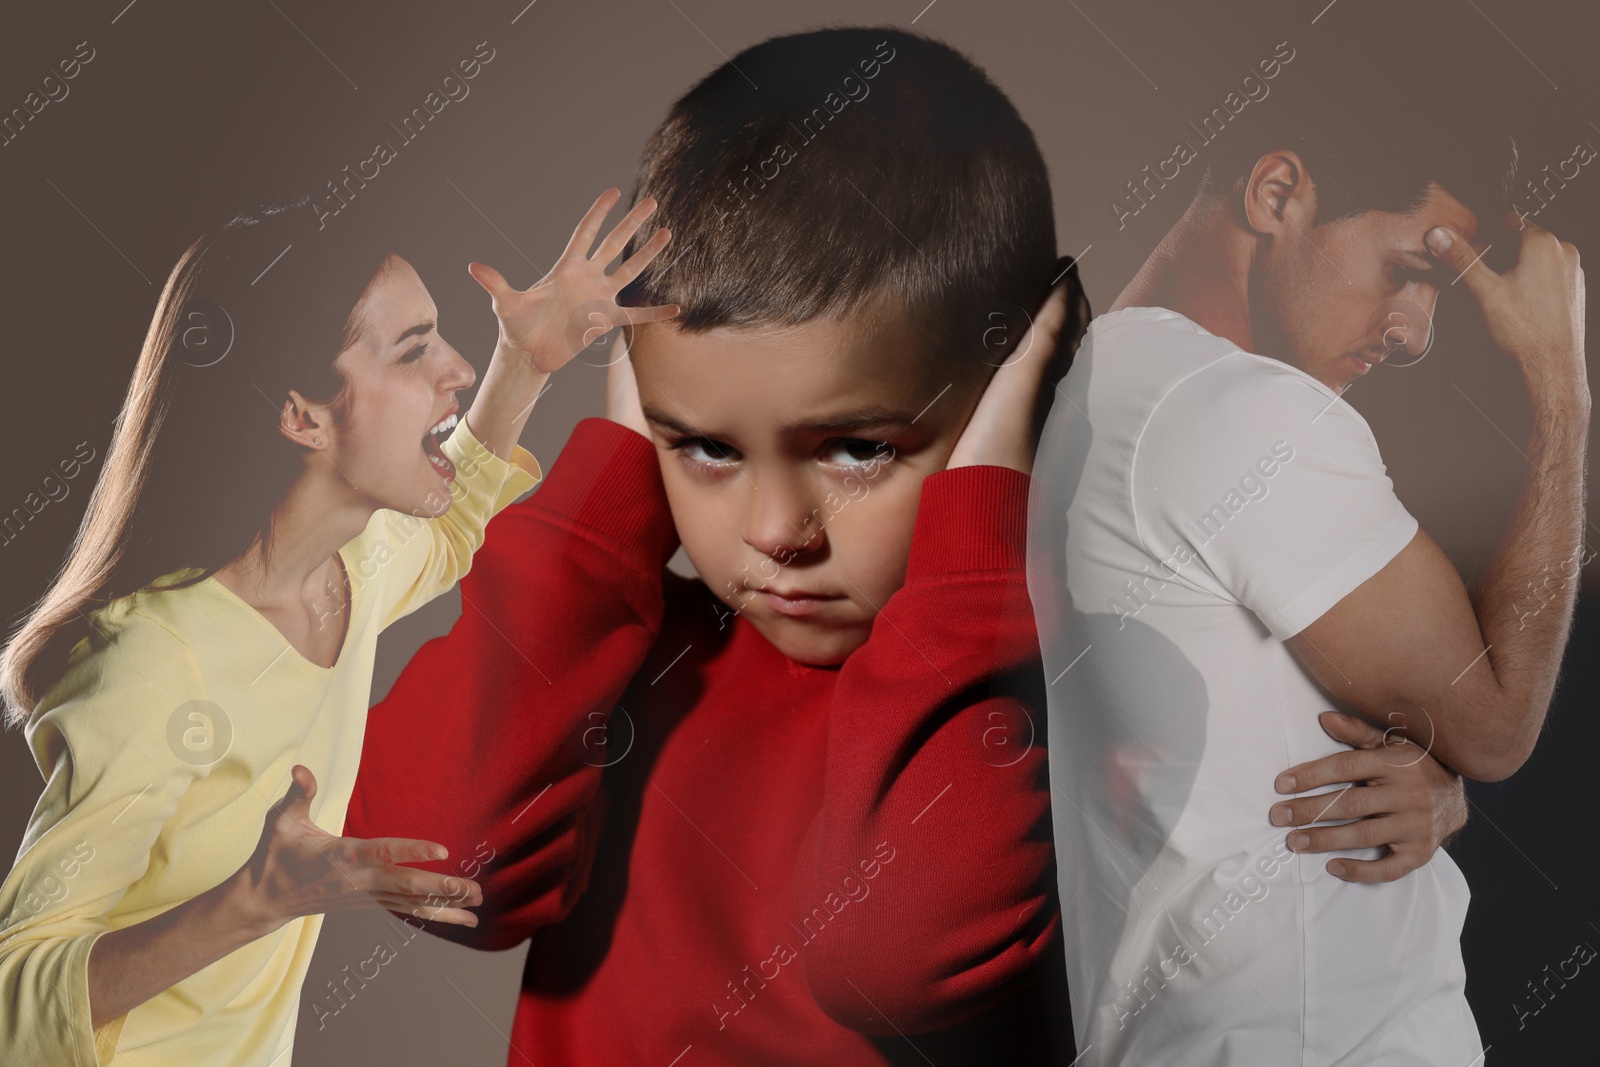 Image of Double exposure of scared little boy and his arguing parents